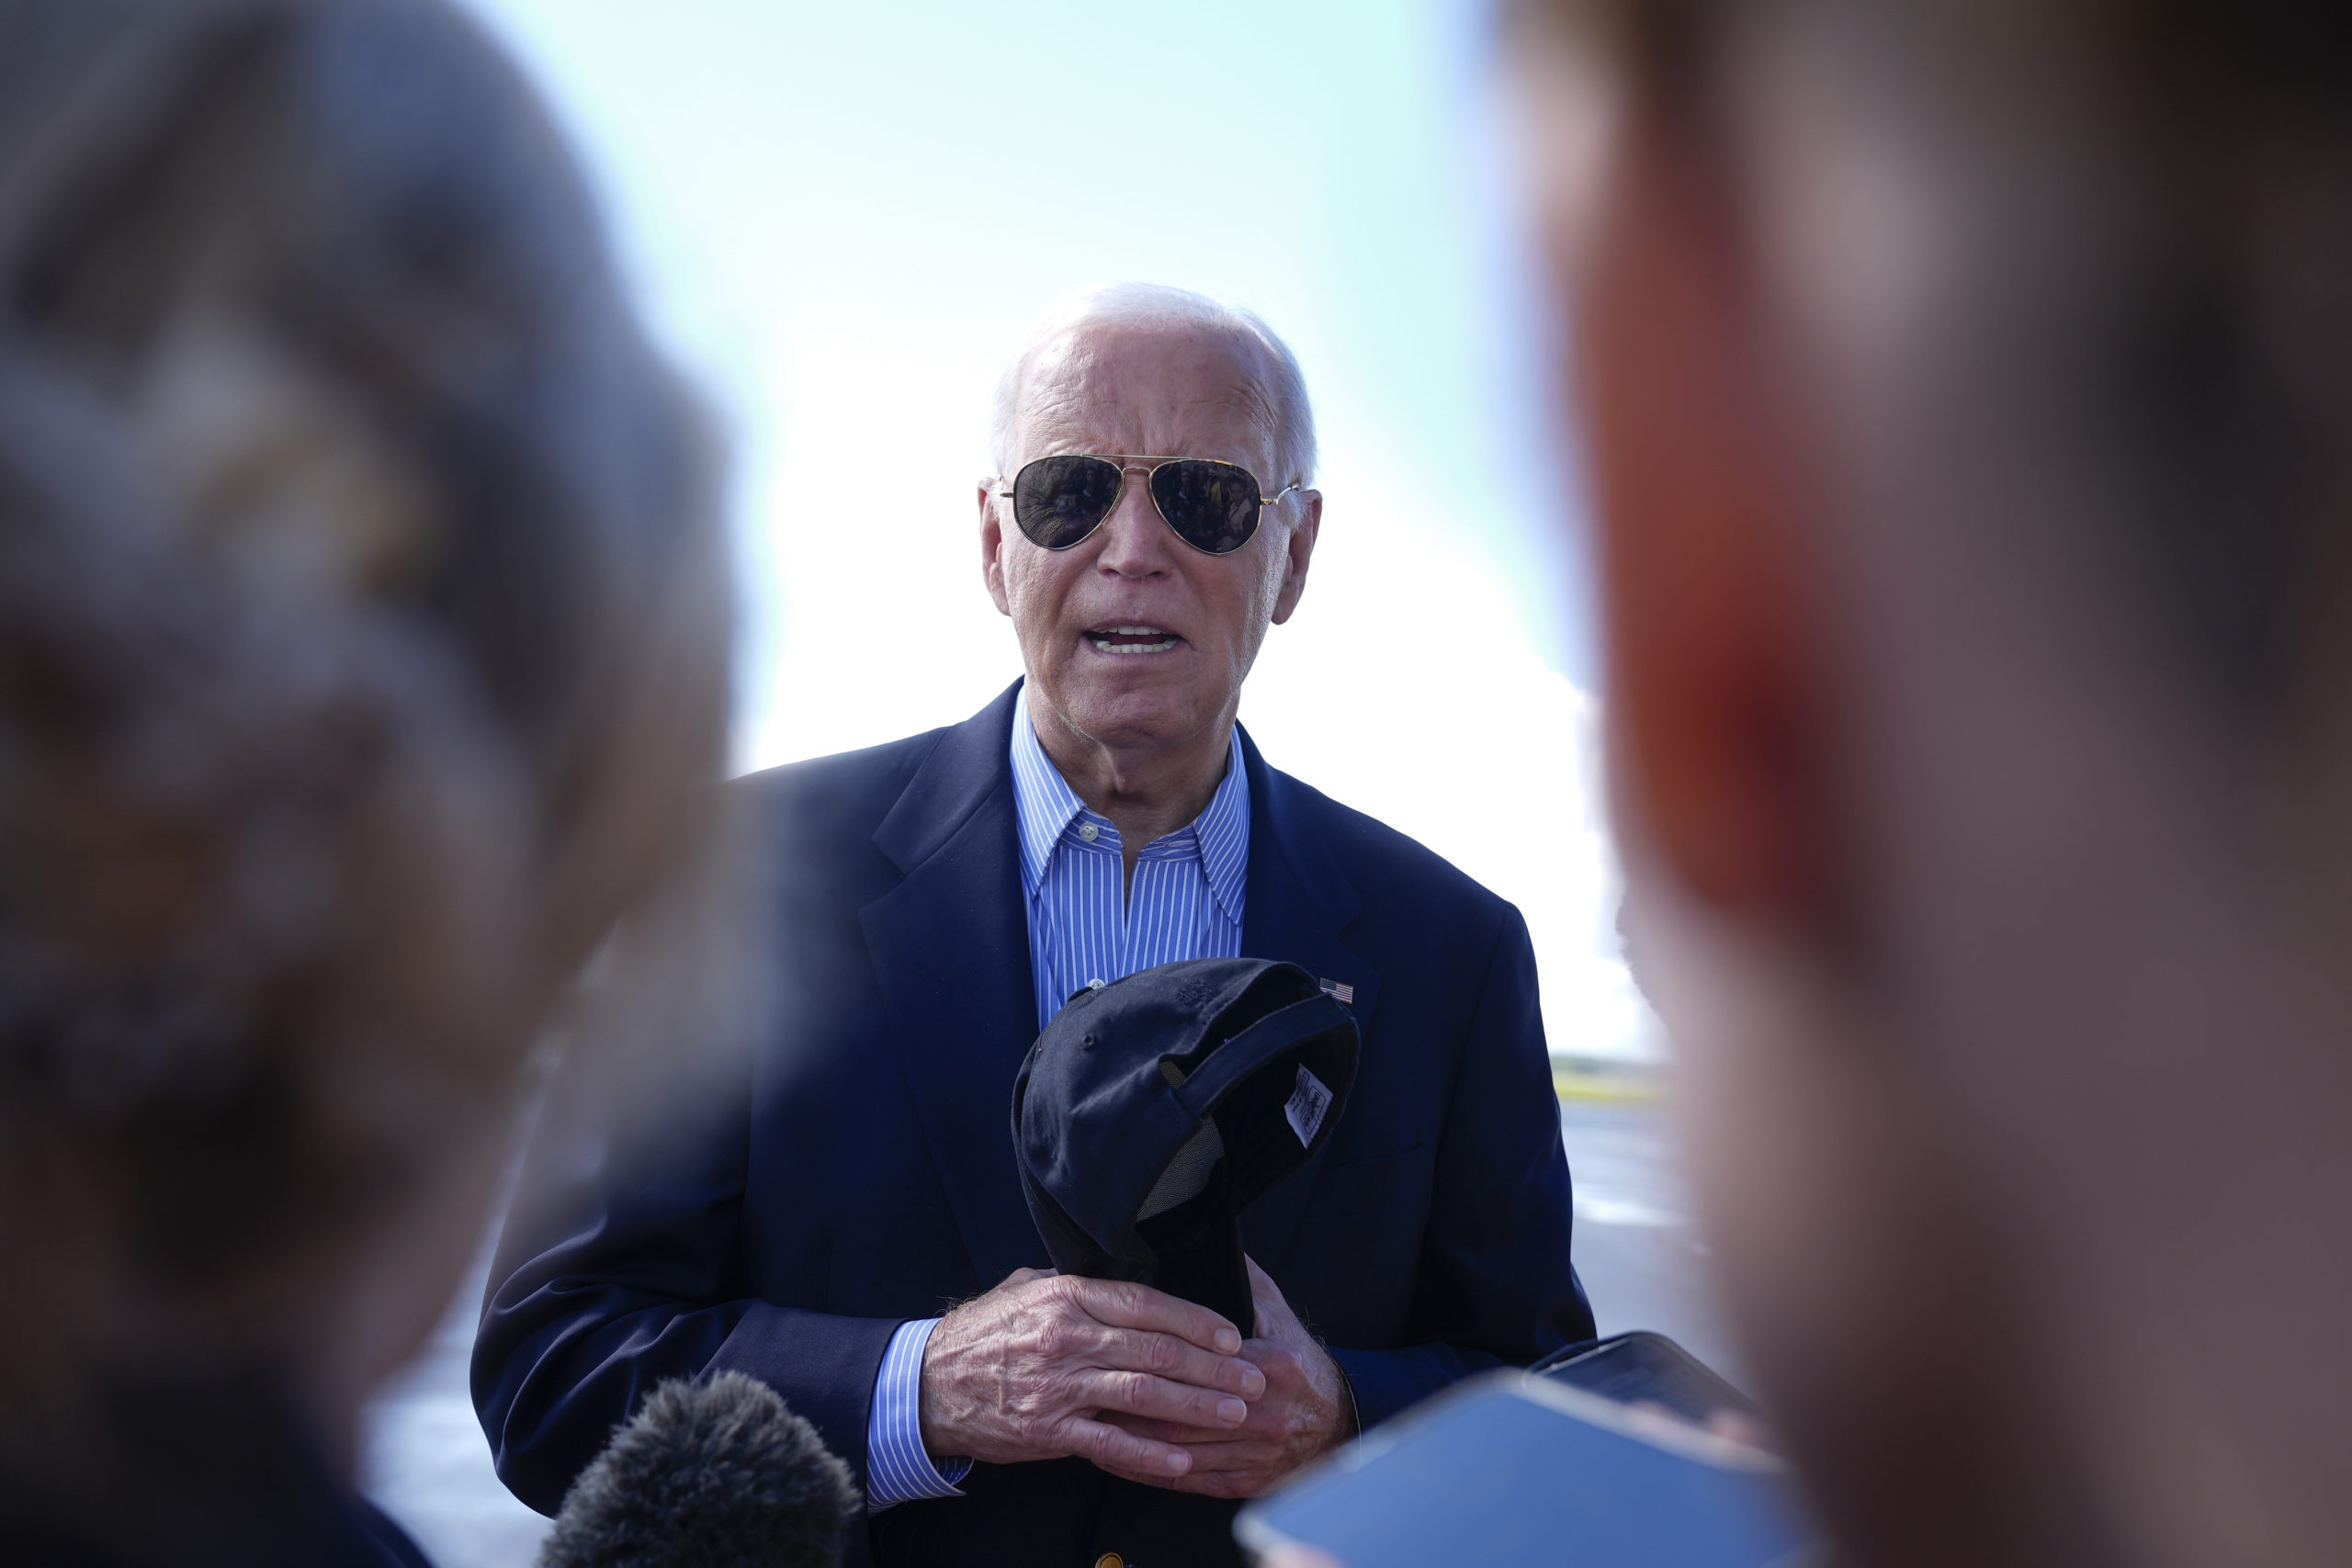 Radio Hosts Reveal They Were Given Questions for Biden in Advance, No Negotiation Allowed